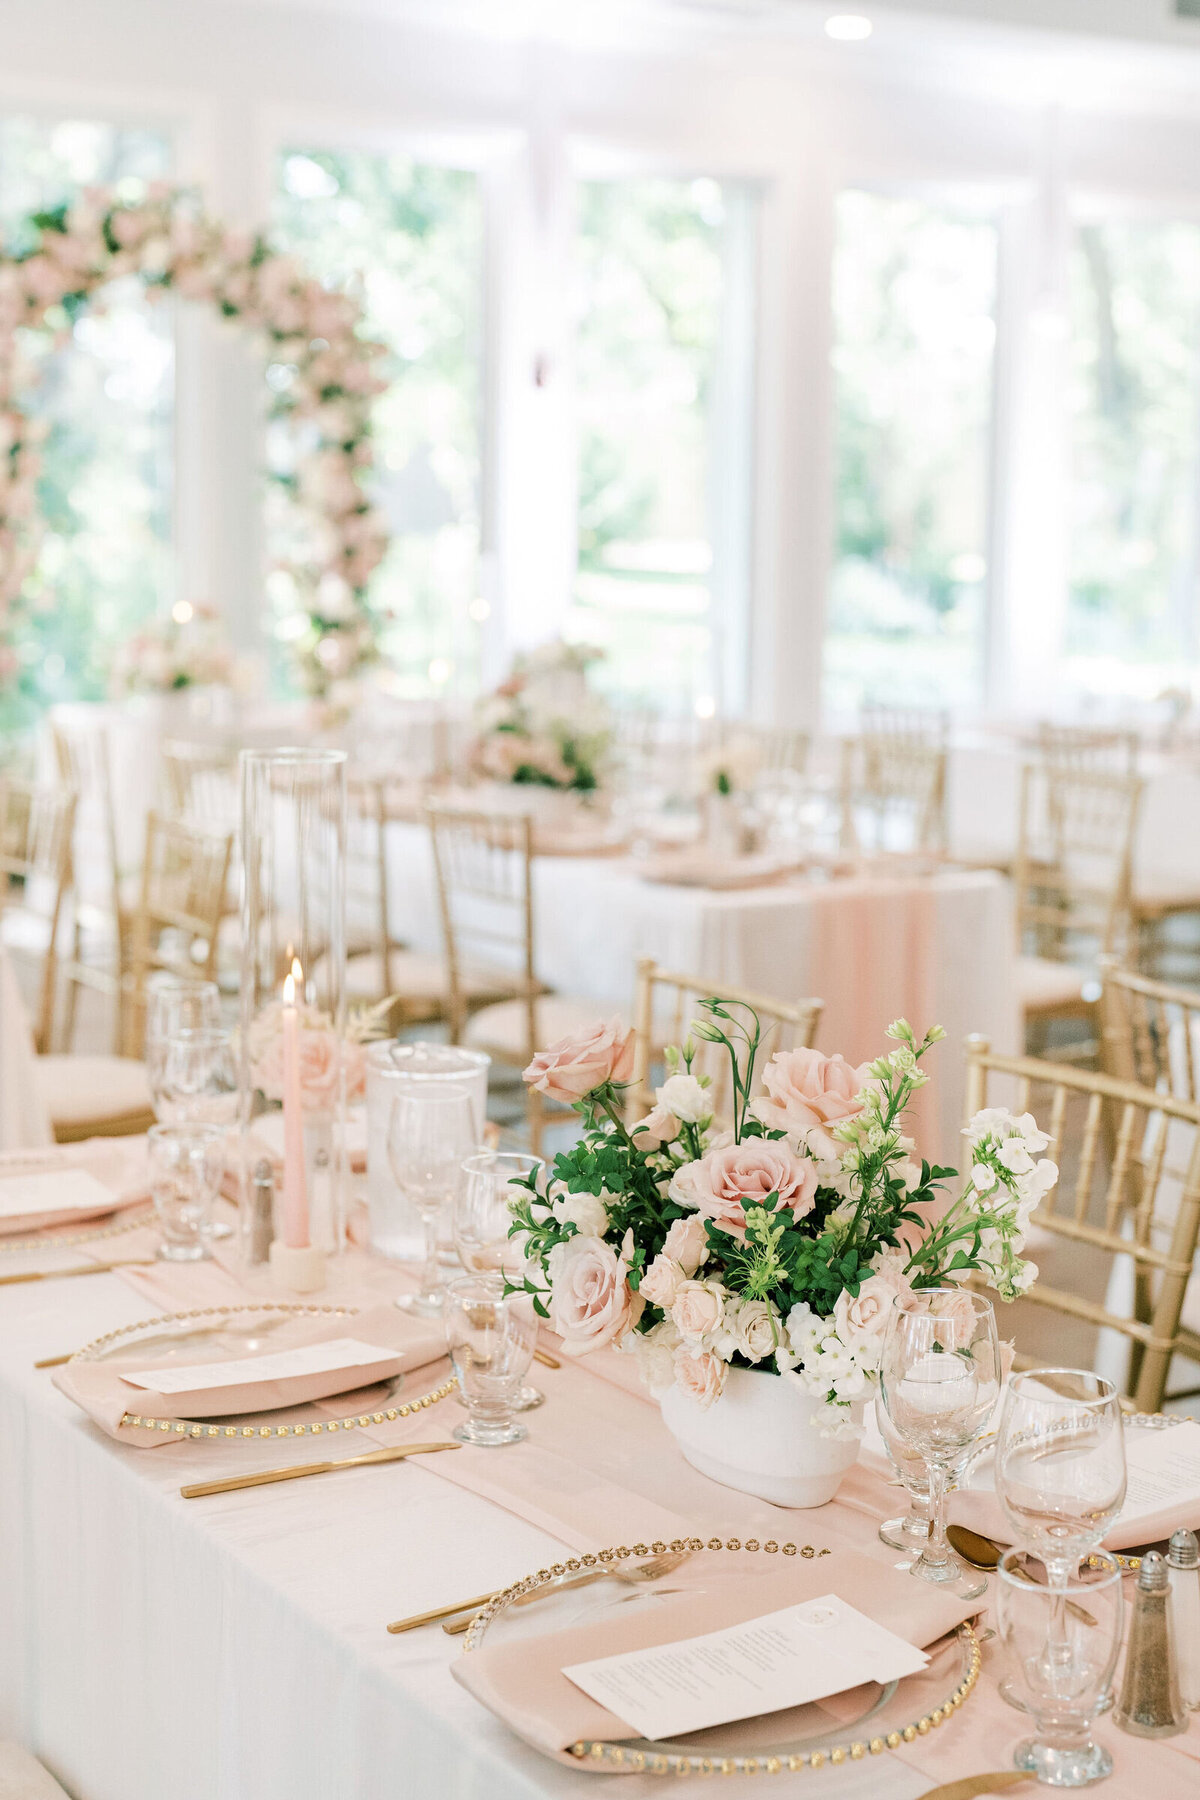 A wedding reception setup with elegant table settings, featuring gold chairs, floral centerpieces with pale pink roses, and a floral arch in the background. Perfect for those seeking partial wedding planning services, a Banff wedding planner can bring this vision to life seamlessly.